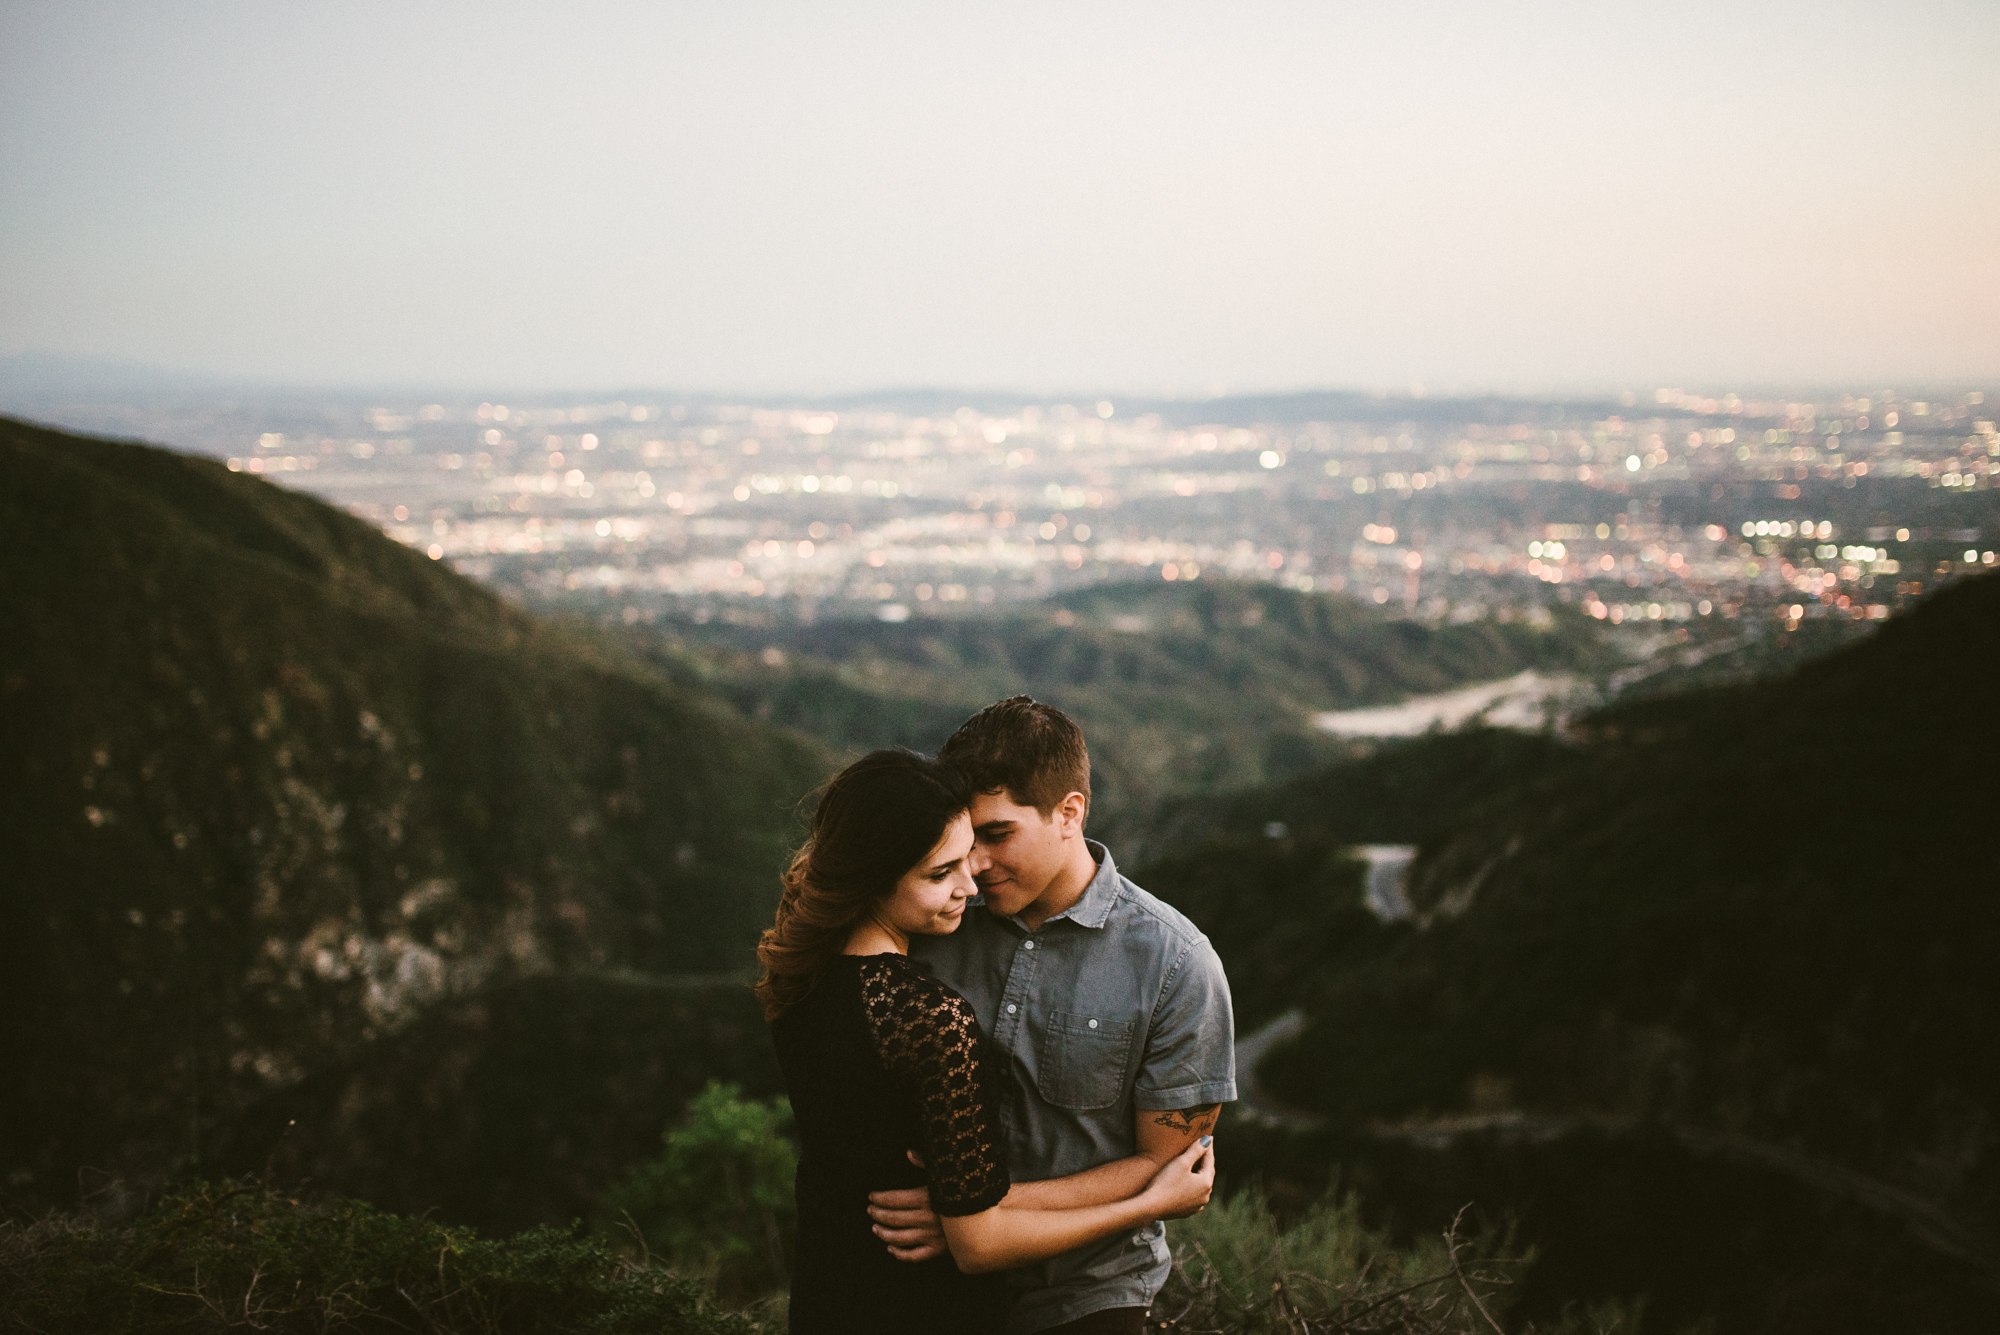 Isaiah & Taylor Photography - Los Angeles - Destination Wedding Photographers - Angeles National Forest Engagement-19.jpg